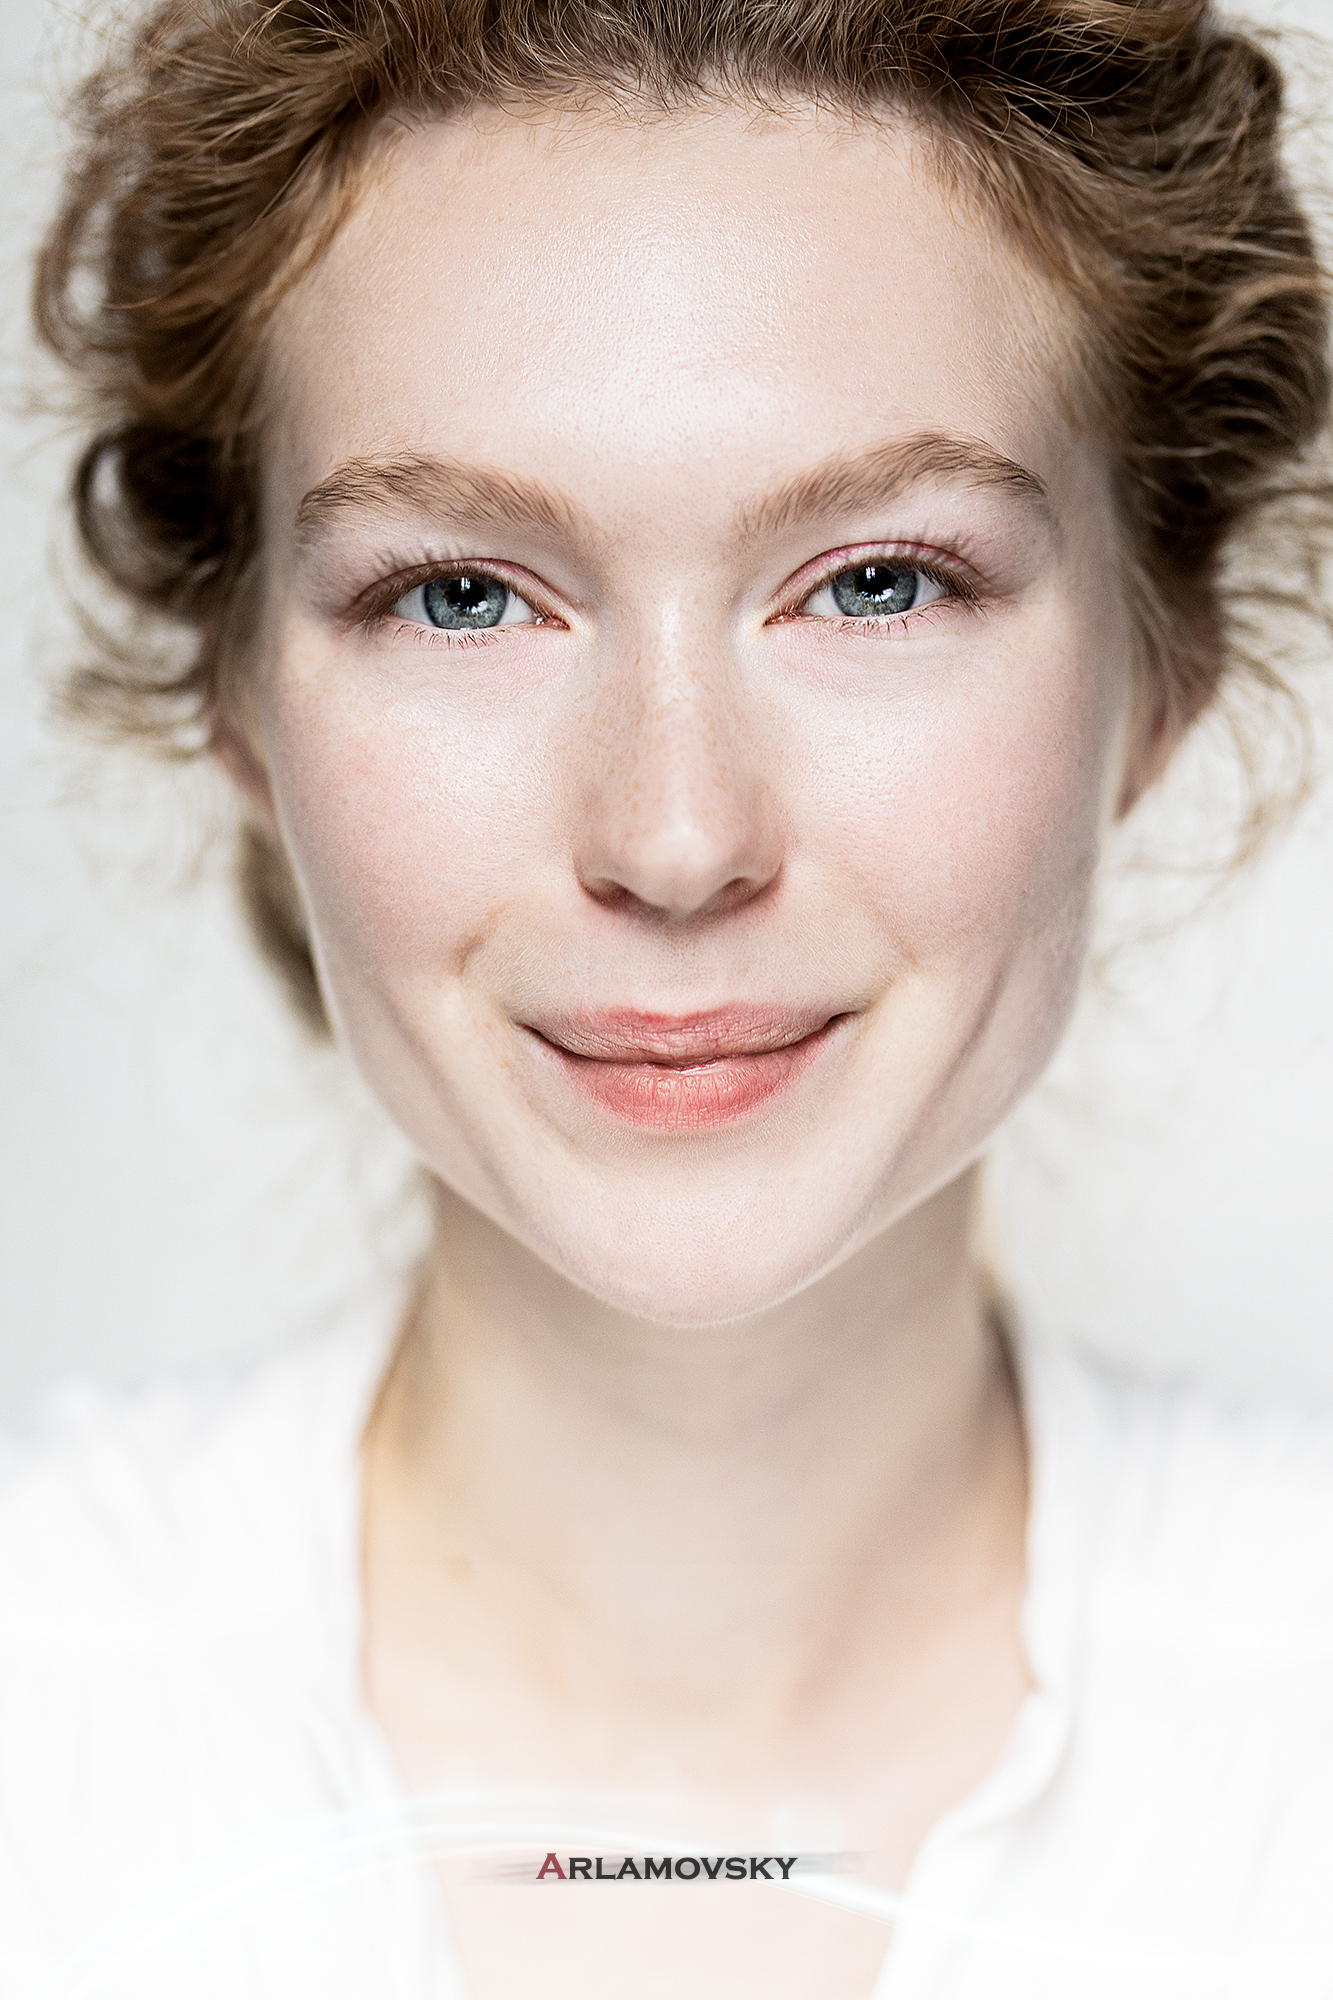 People 1333x2000 arlamovsky photography portrait retouching women women indoors redhead face eyes smiling white background portrait display closeup watermarked